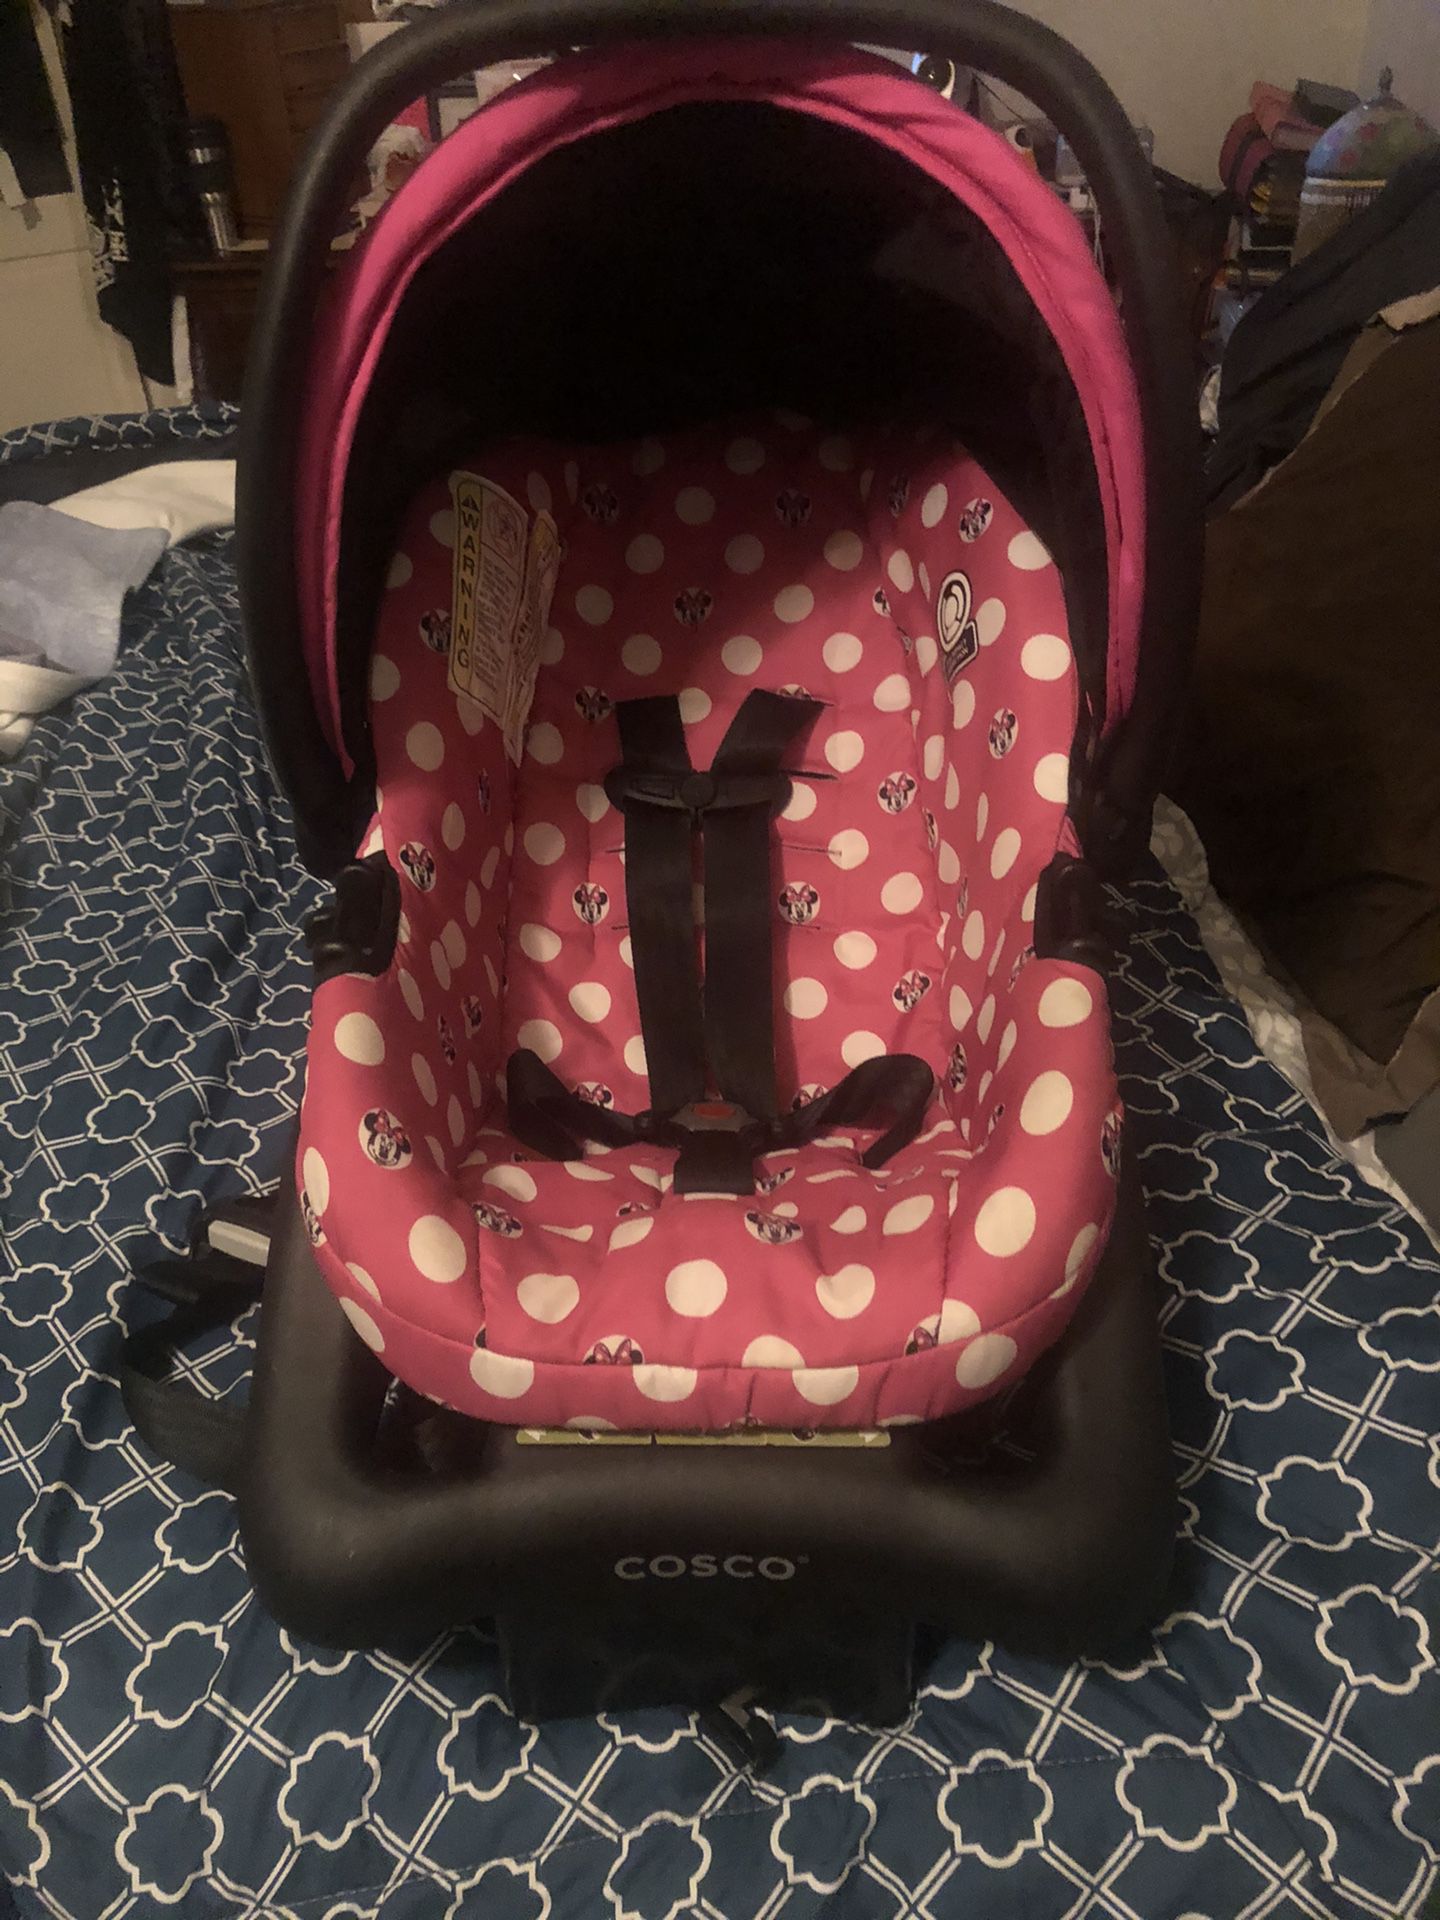 Cisco infant car seat with 2 bases.